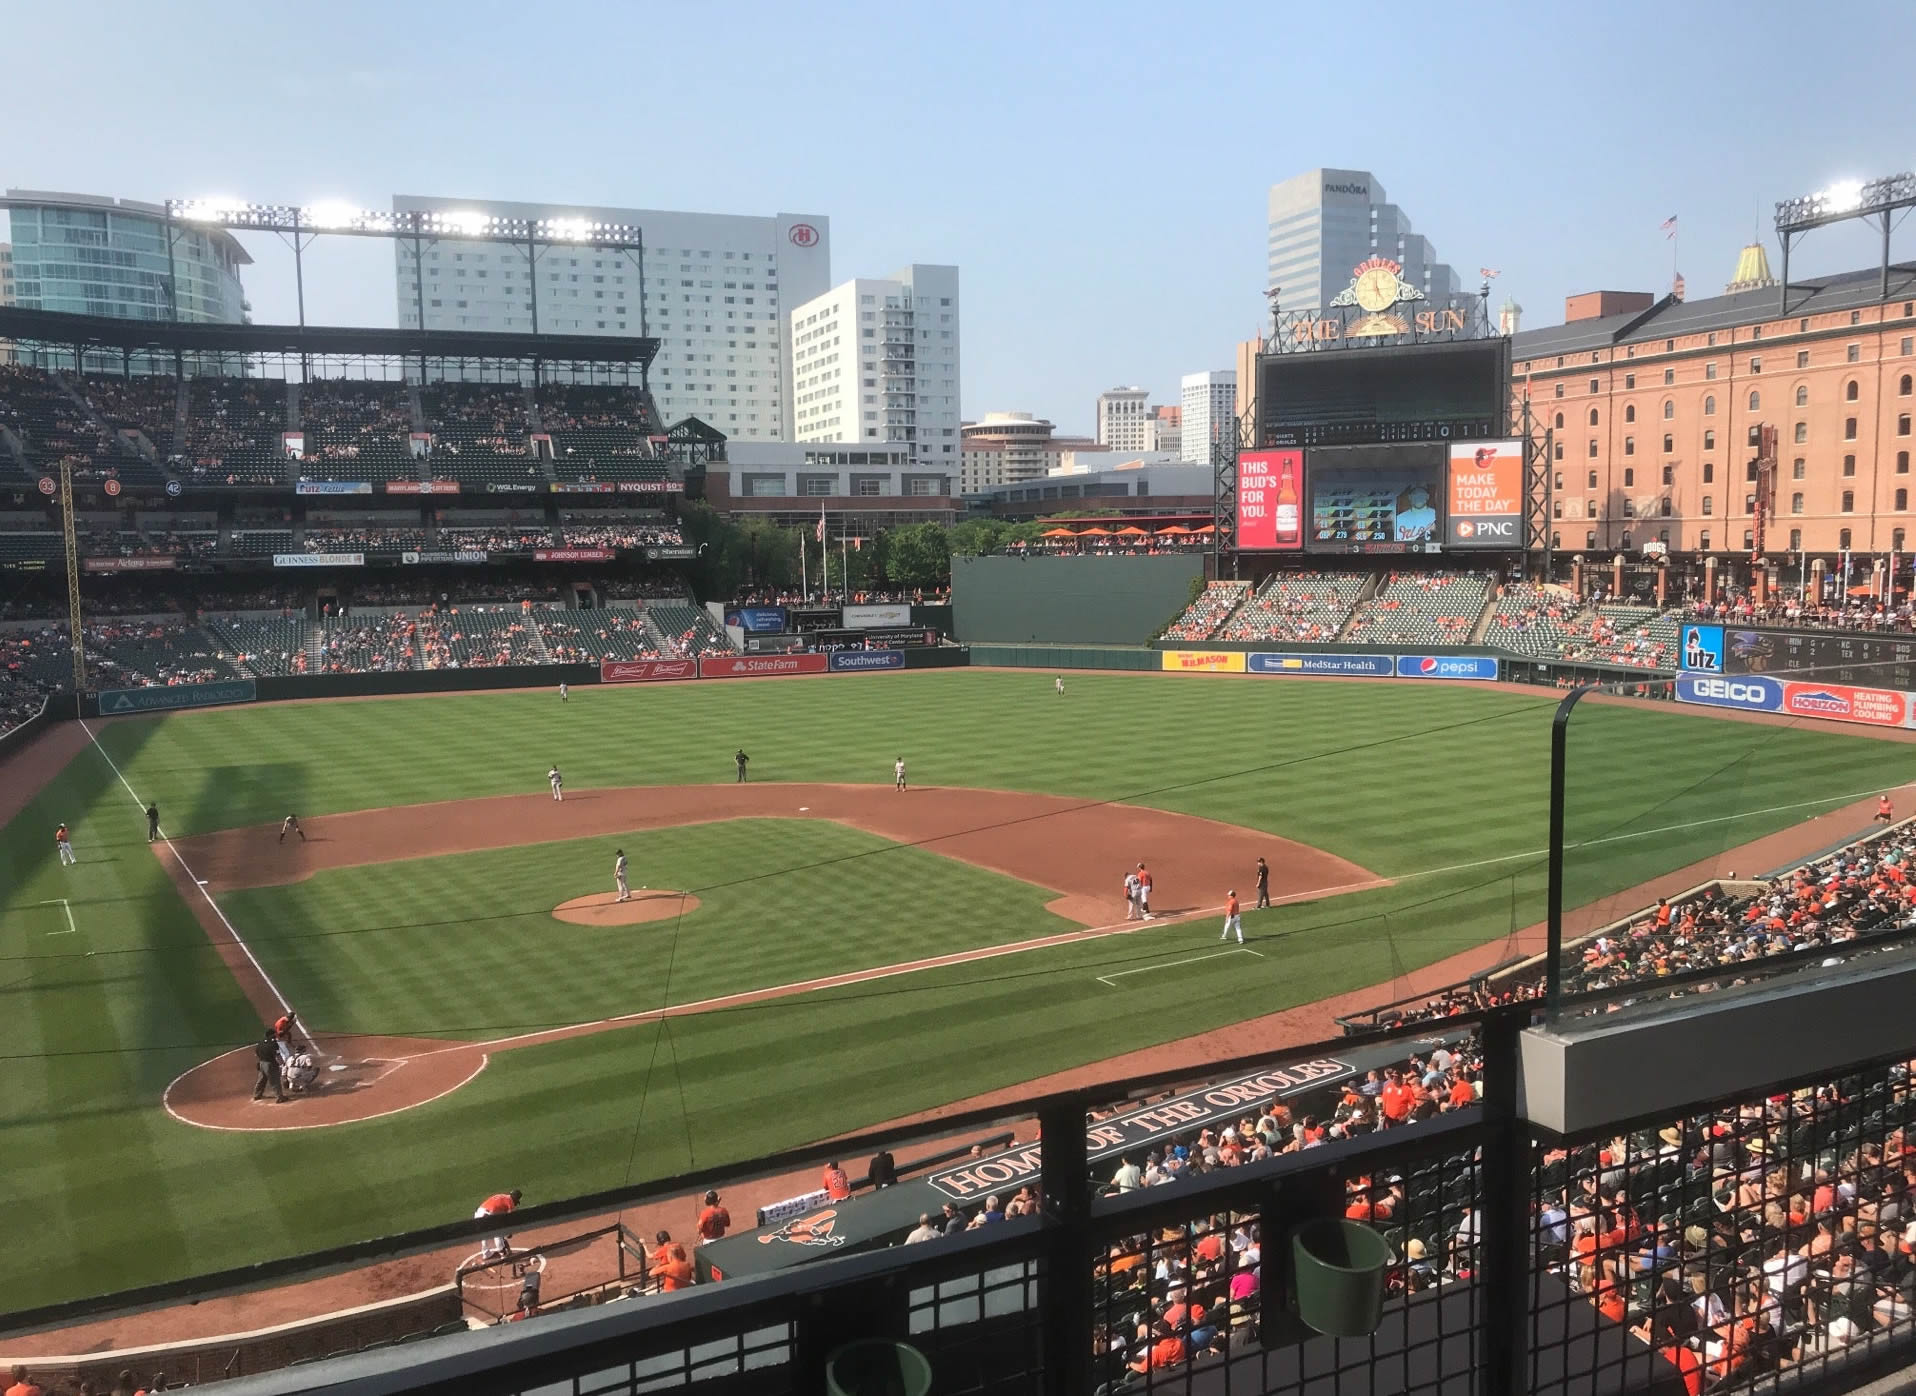 section 230, row 1 seat view  - oriole park